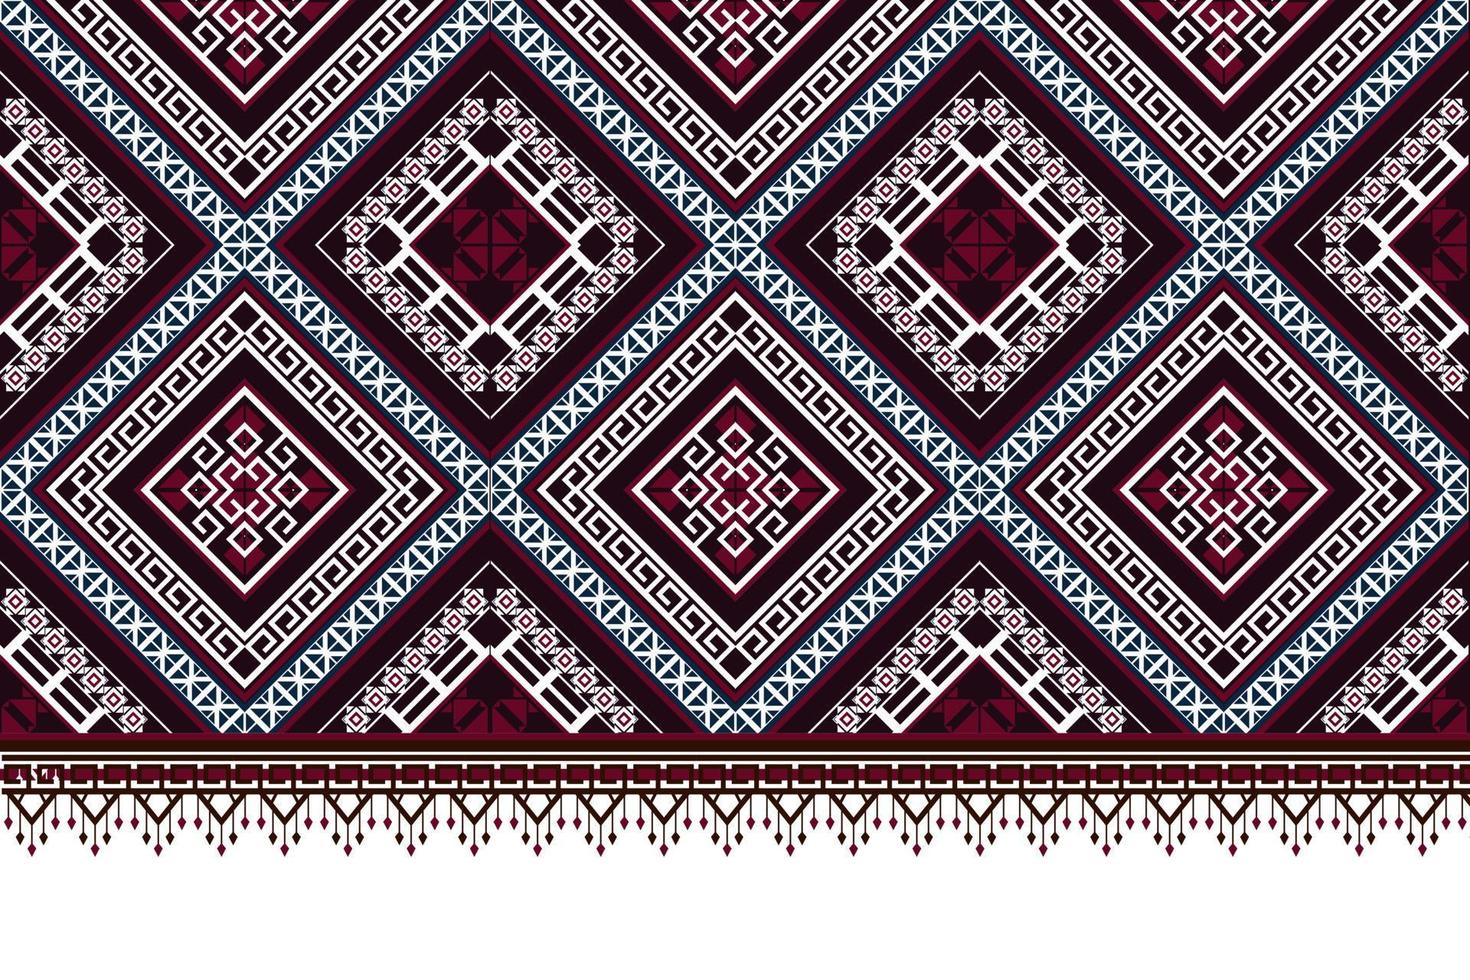 Geometric ethnic oriental ikat pattern traditional Design for background,carpet,wallpaper,clothing,wrapping,Batik,fabric,Vector illustration.embroidery style. vector